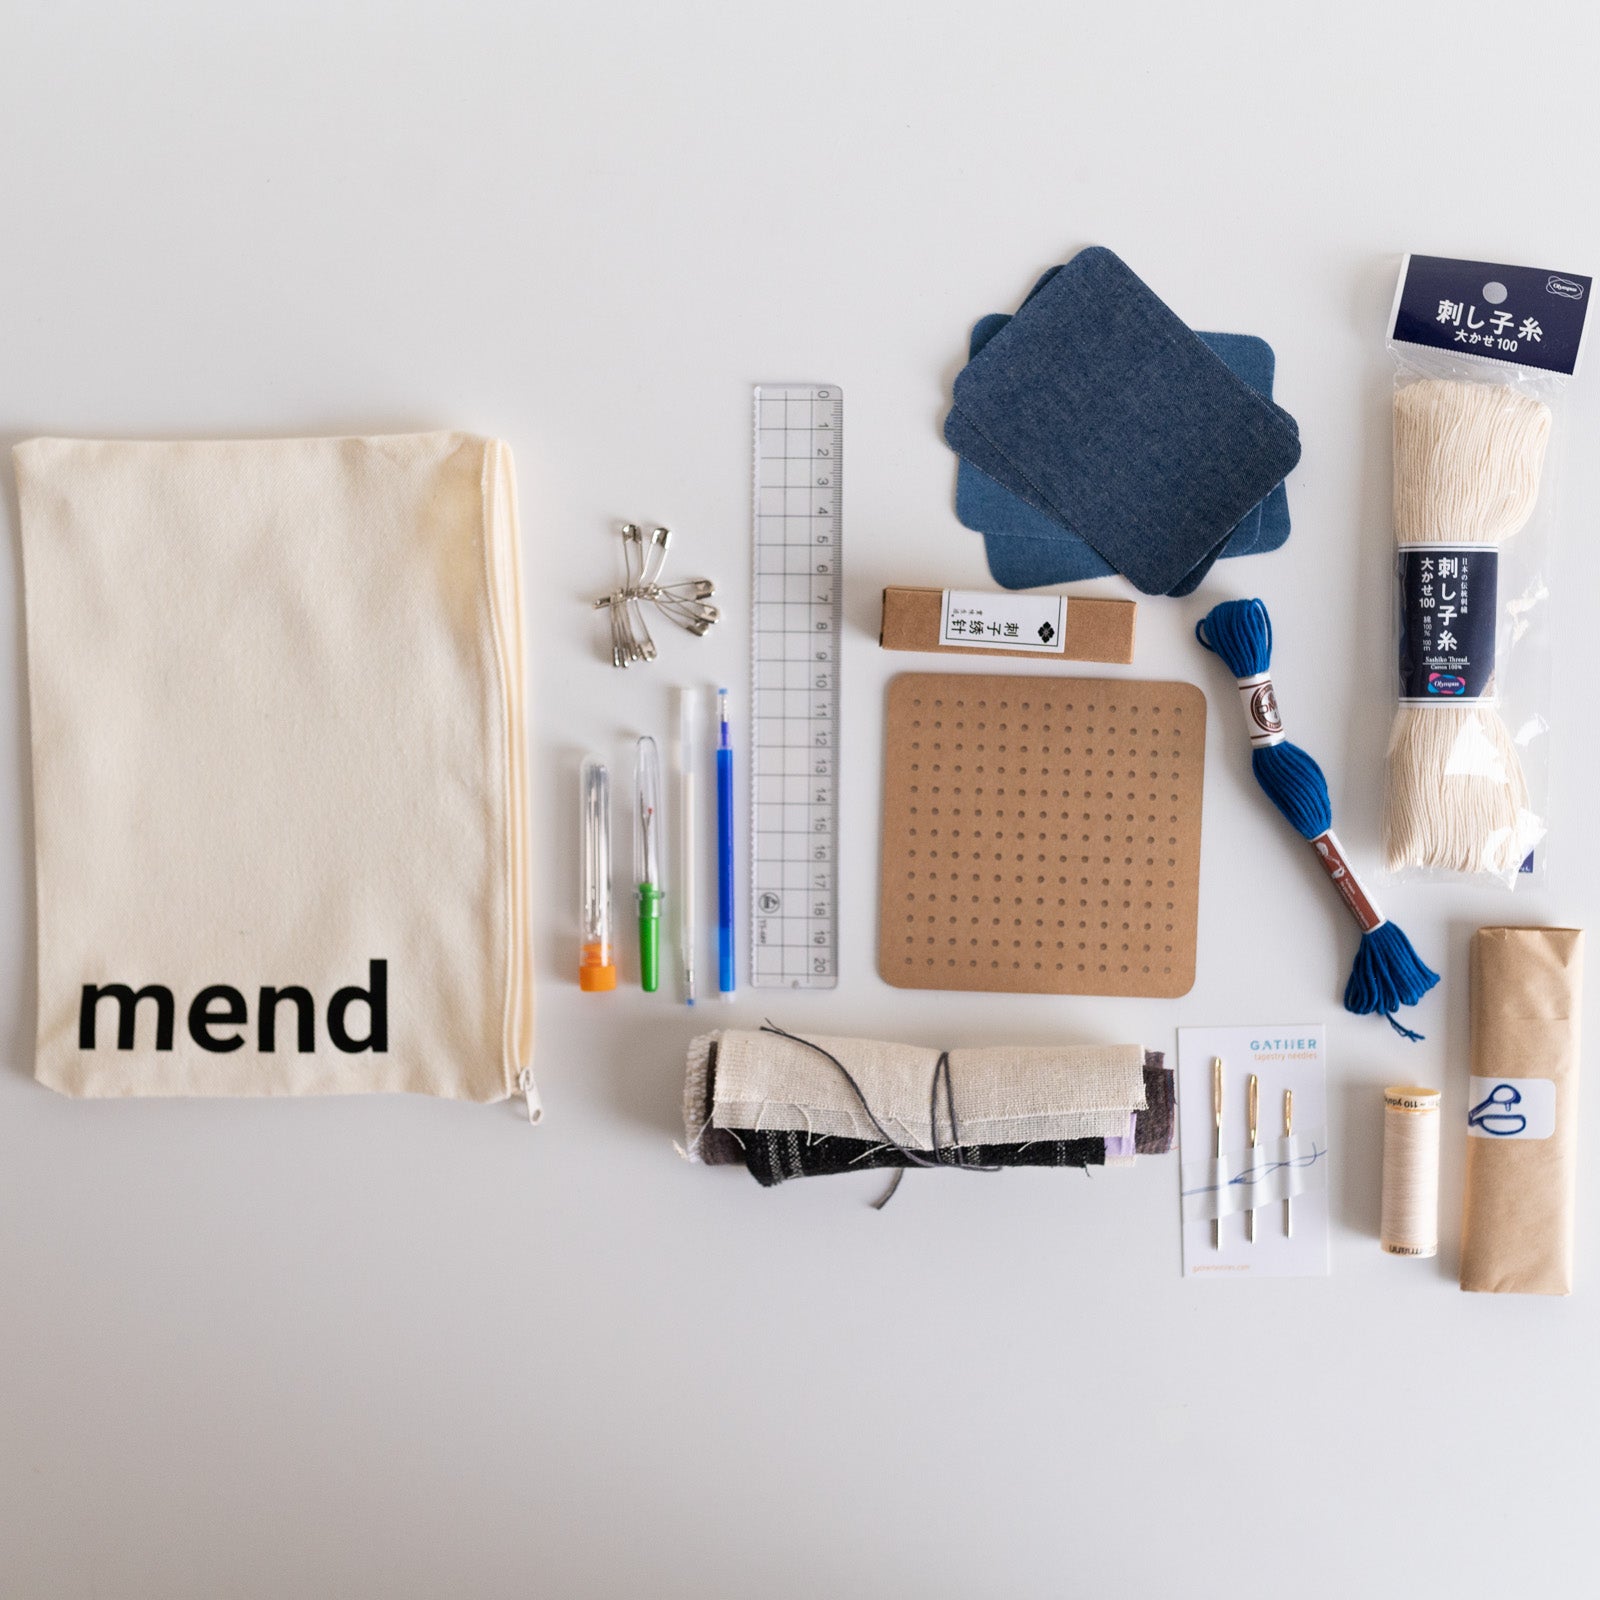 Limited Edition: Master Mending Kit by Gather - GATHER Textiles Inc.